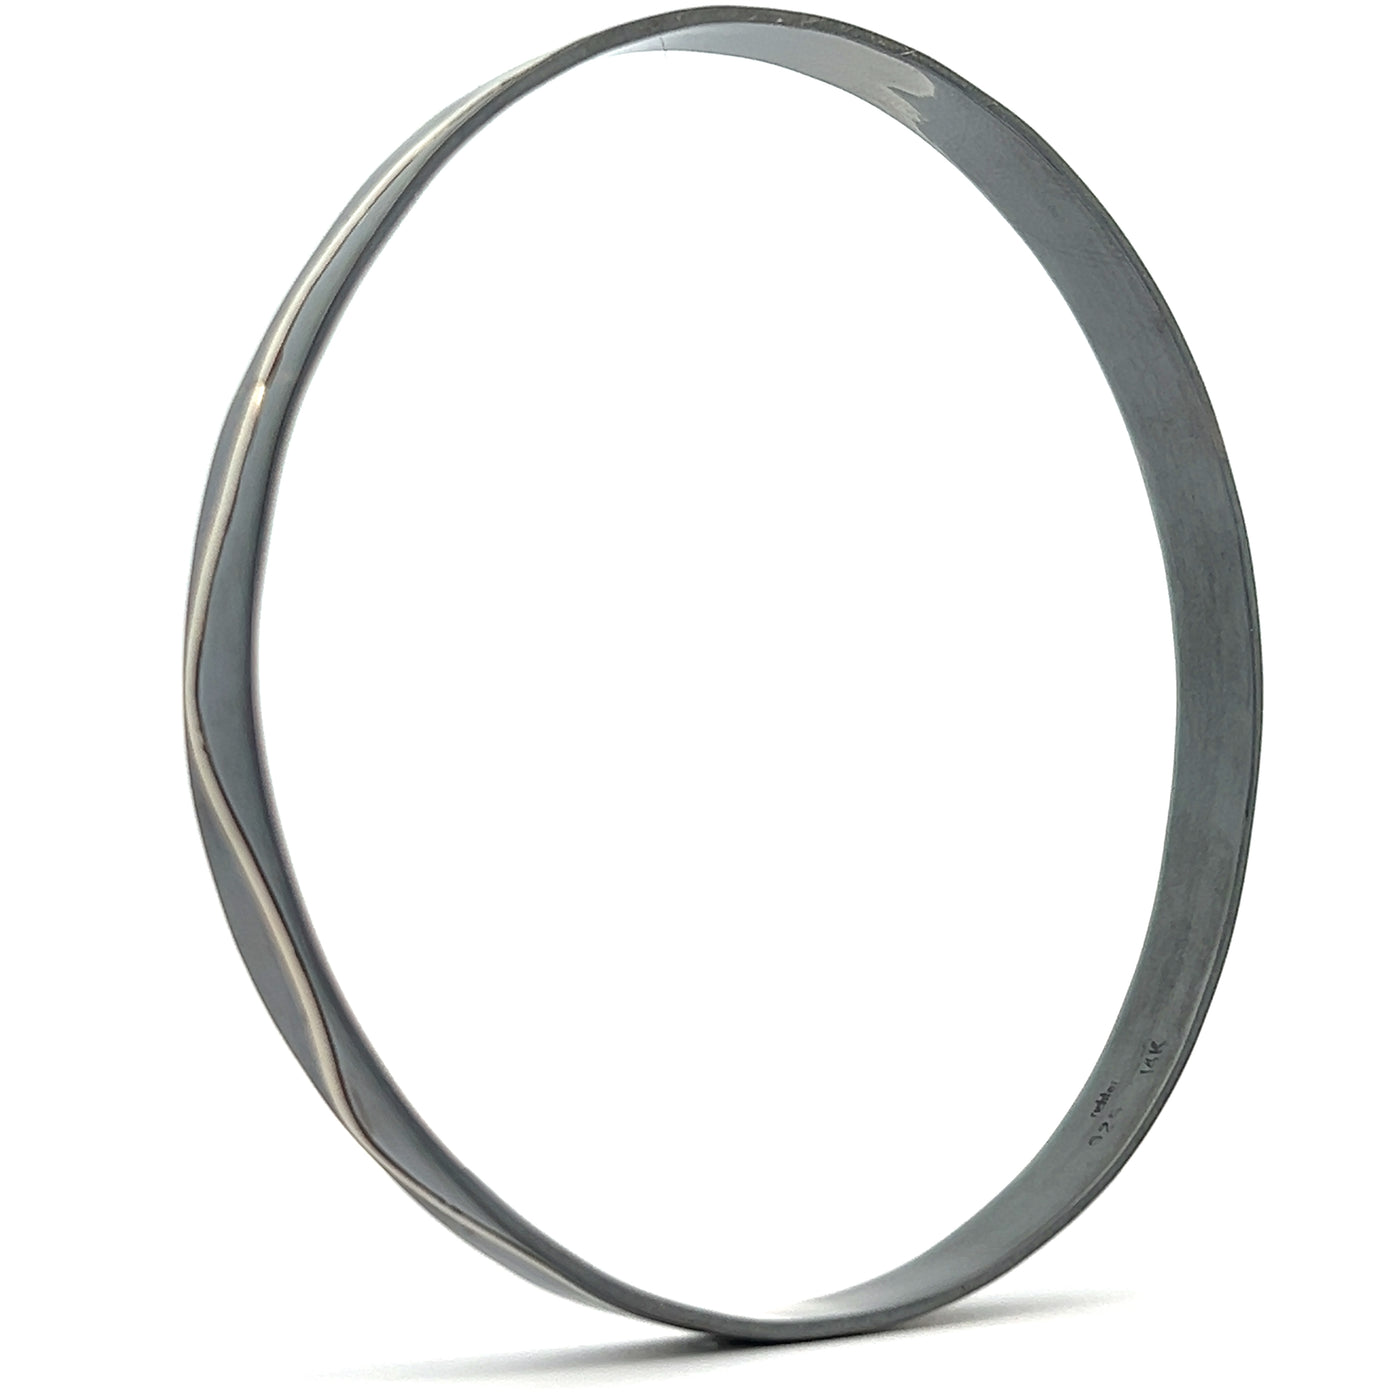 Oxidized Sterling Silver and 14k White Gold Pathways 7.5" Bangle Bracelet by Paul Richter